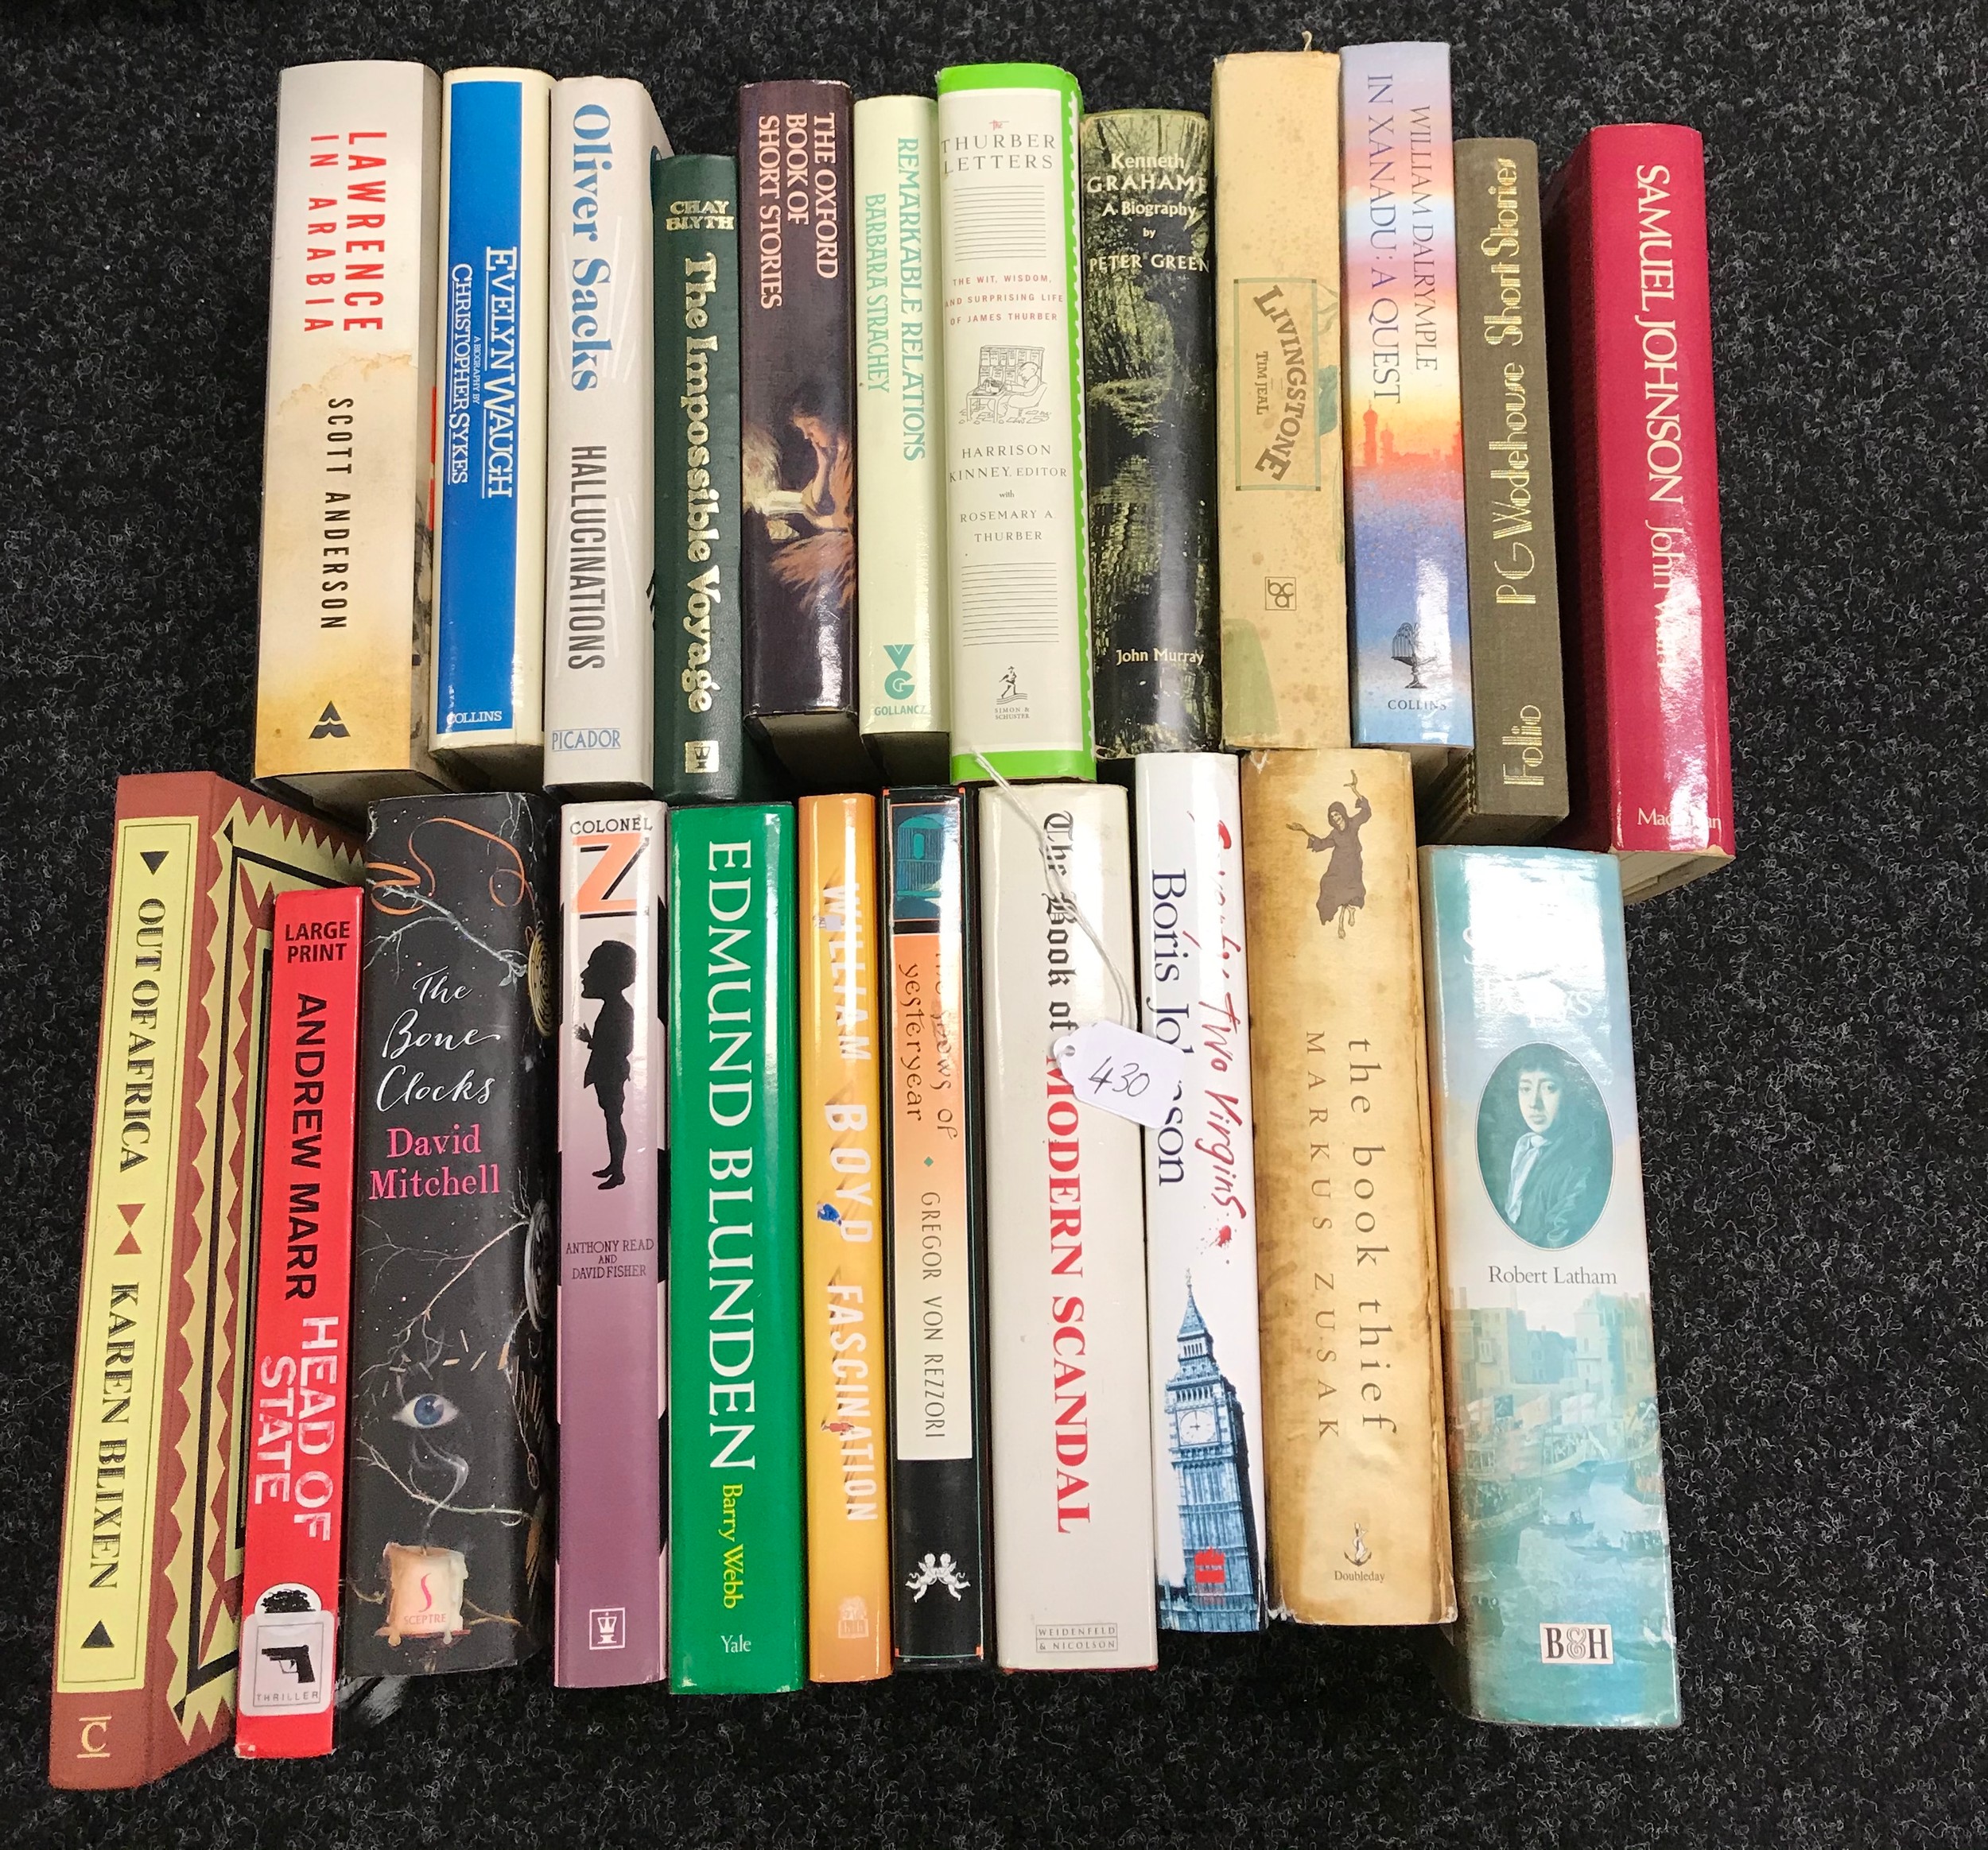 Various books to include Seventy Two Virgins by Boris Johnson, Out of Africa by Karen Blixen, The